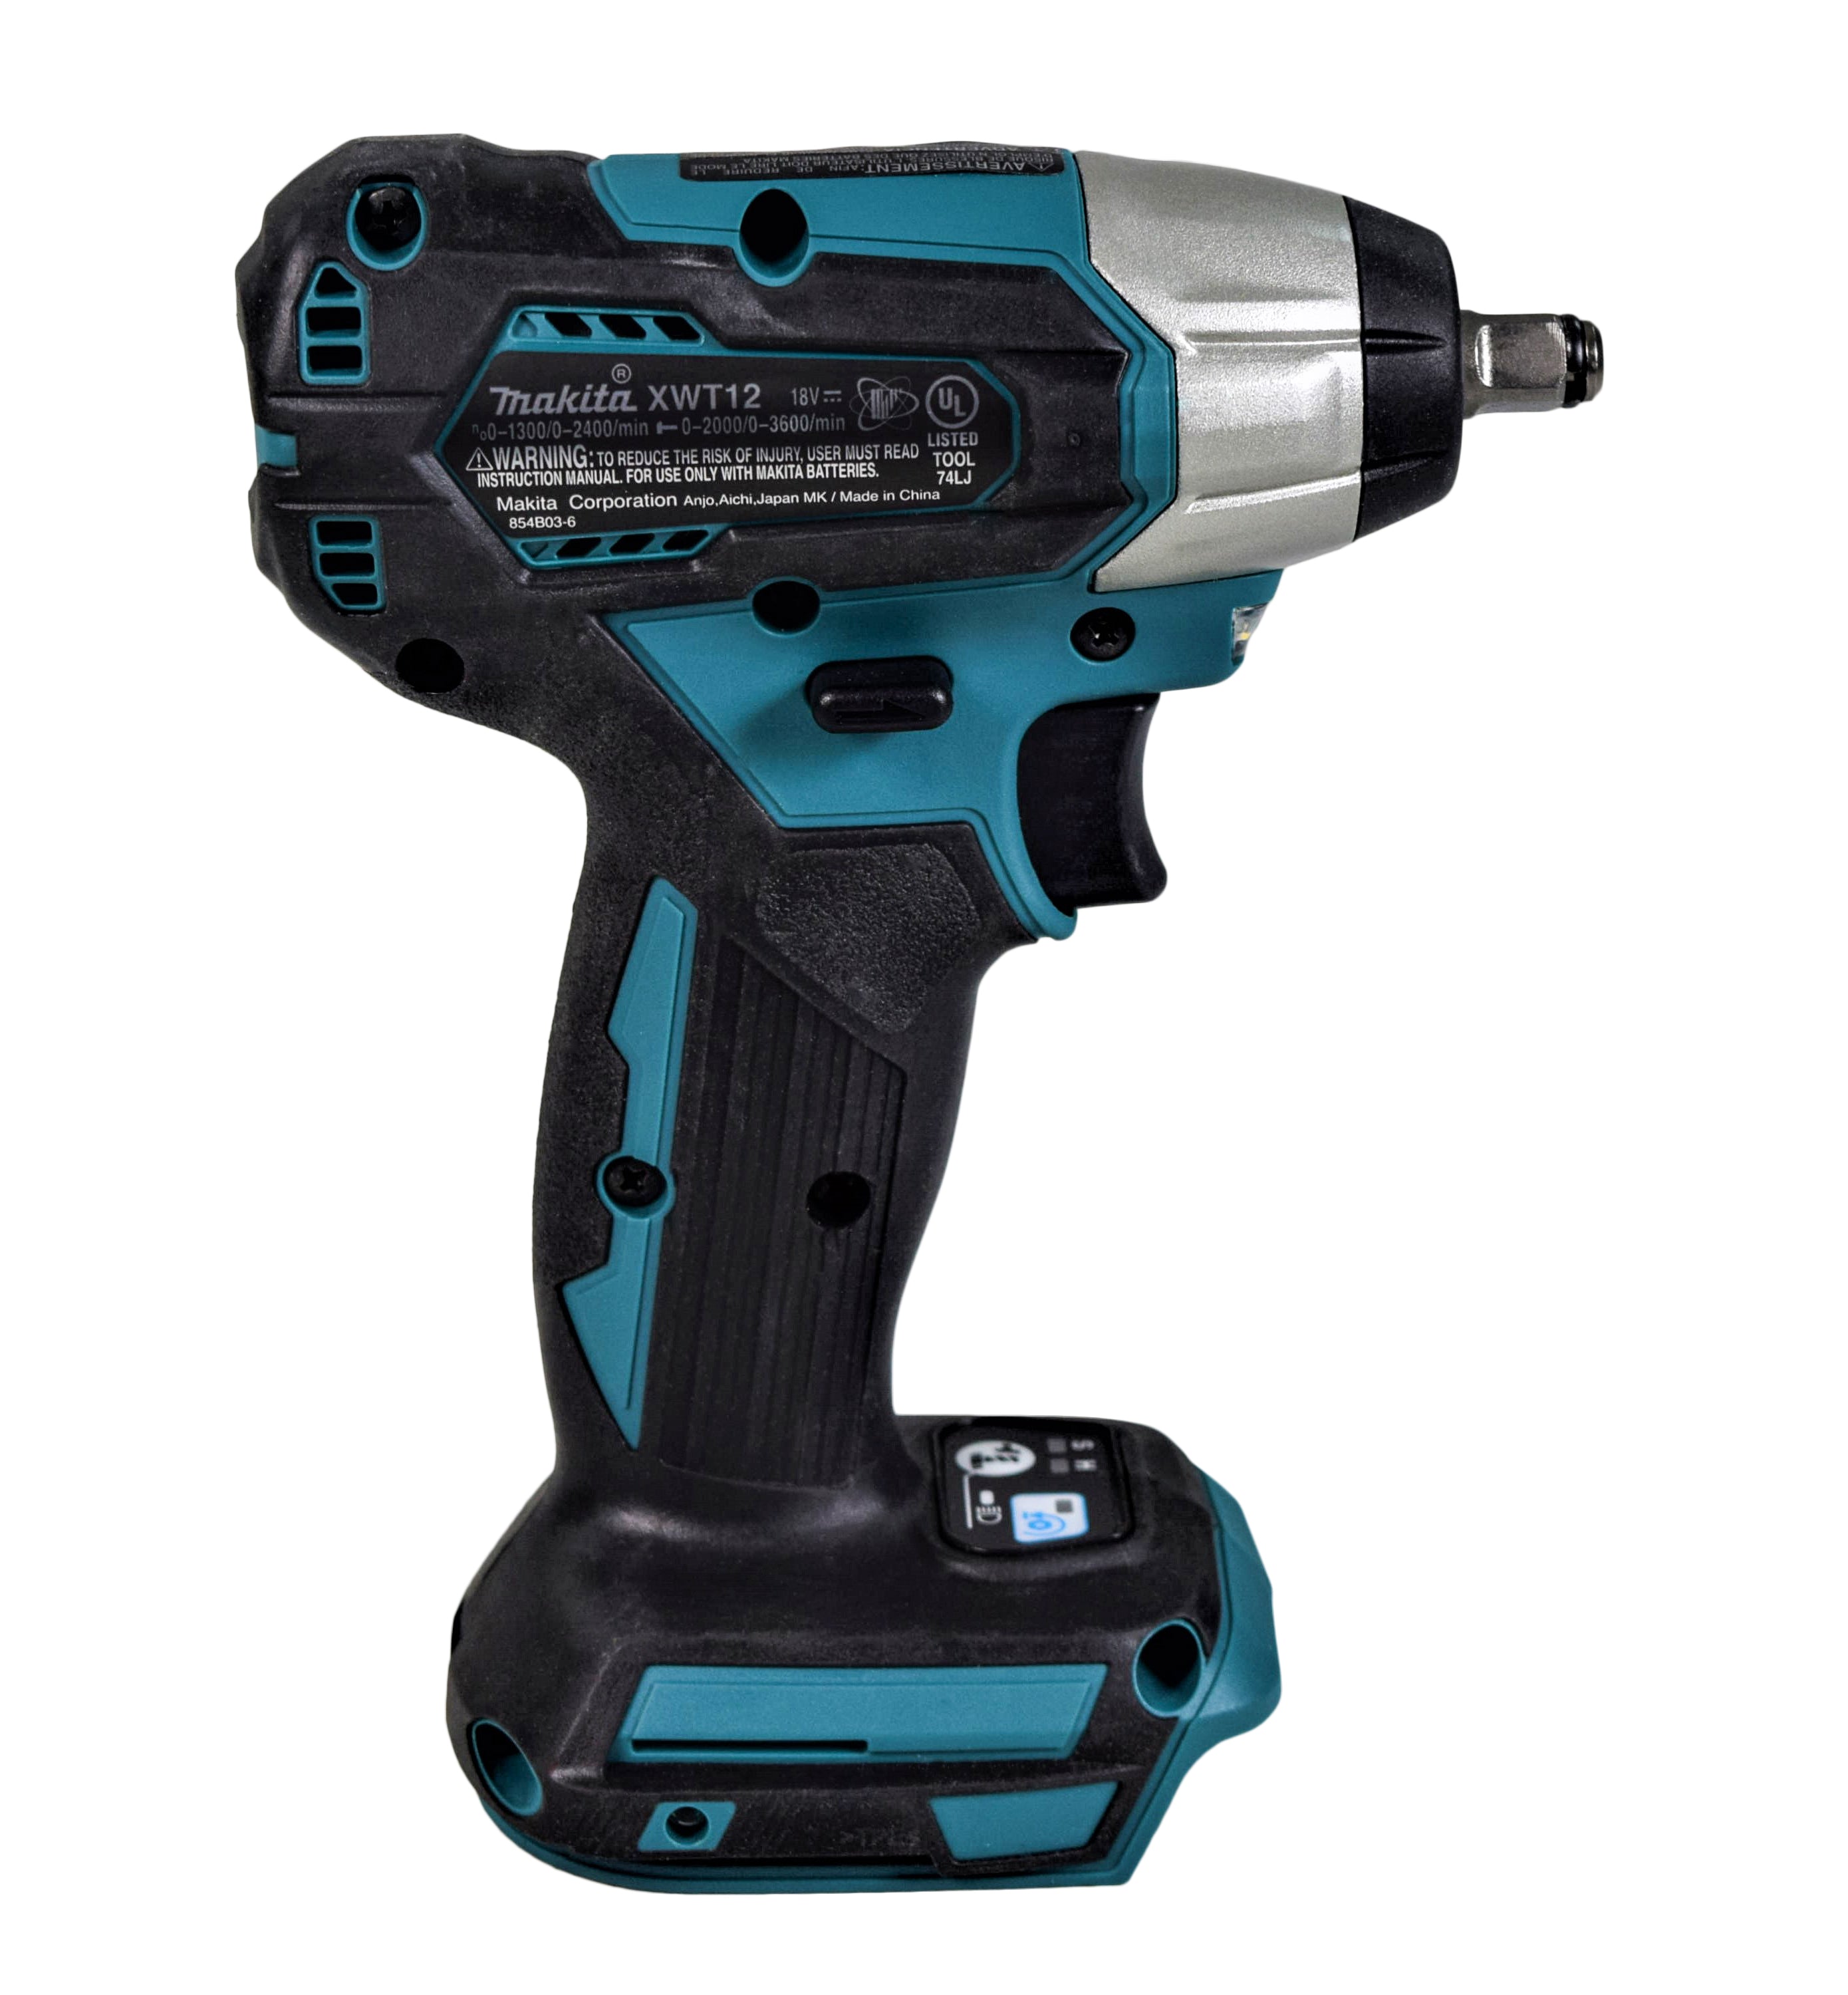 Makita-XWT12Z-18V-LXT-Lithium-Ion-Sub-Compact-Brushless-Cordless-3-8-inch-Sq.-Drive-Impact-Wrench-Tool-Only-image-4